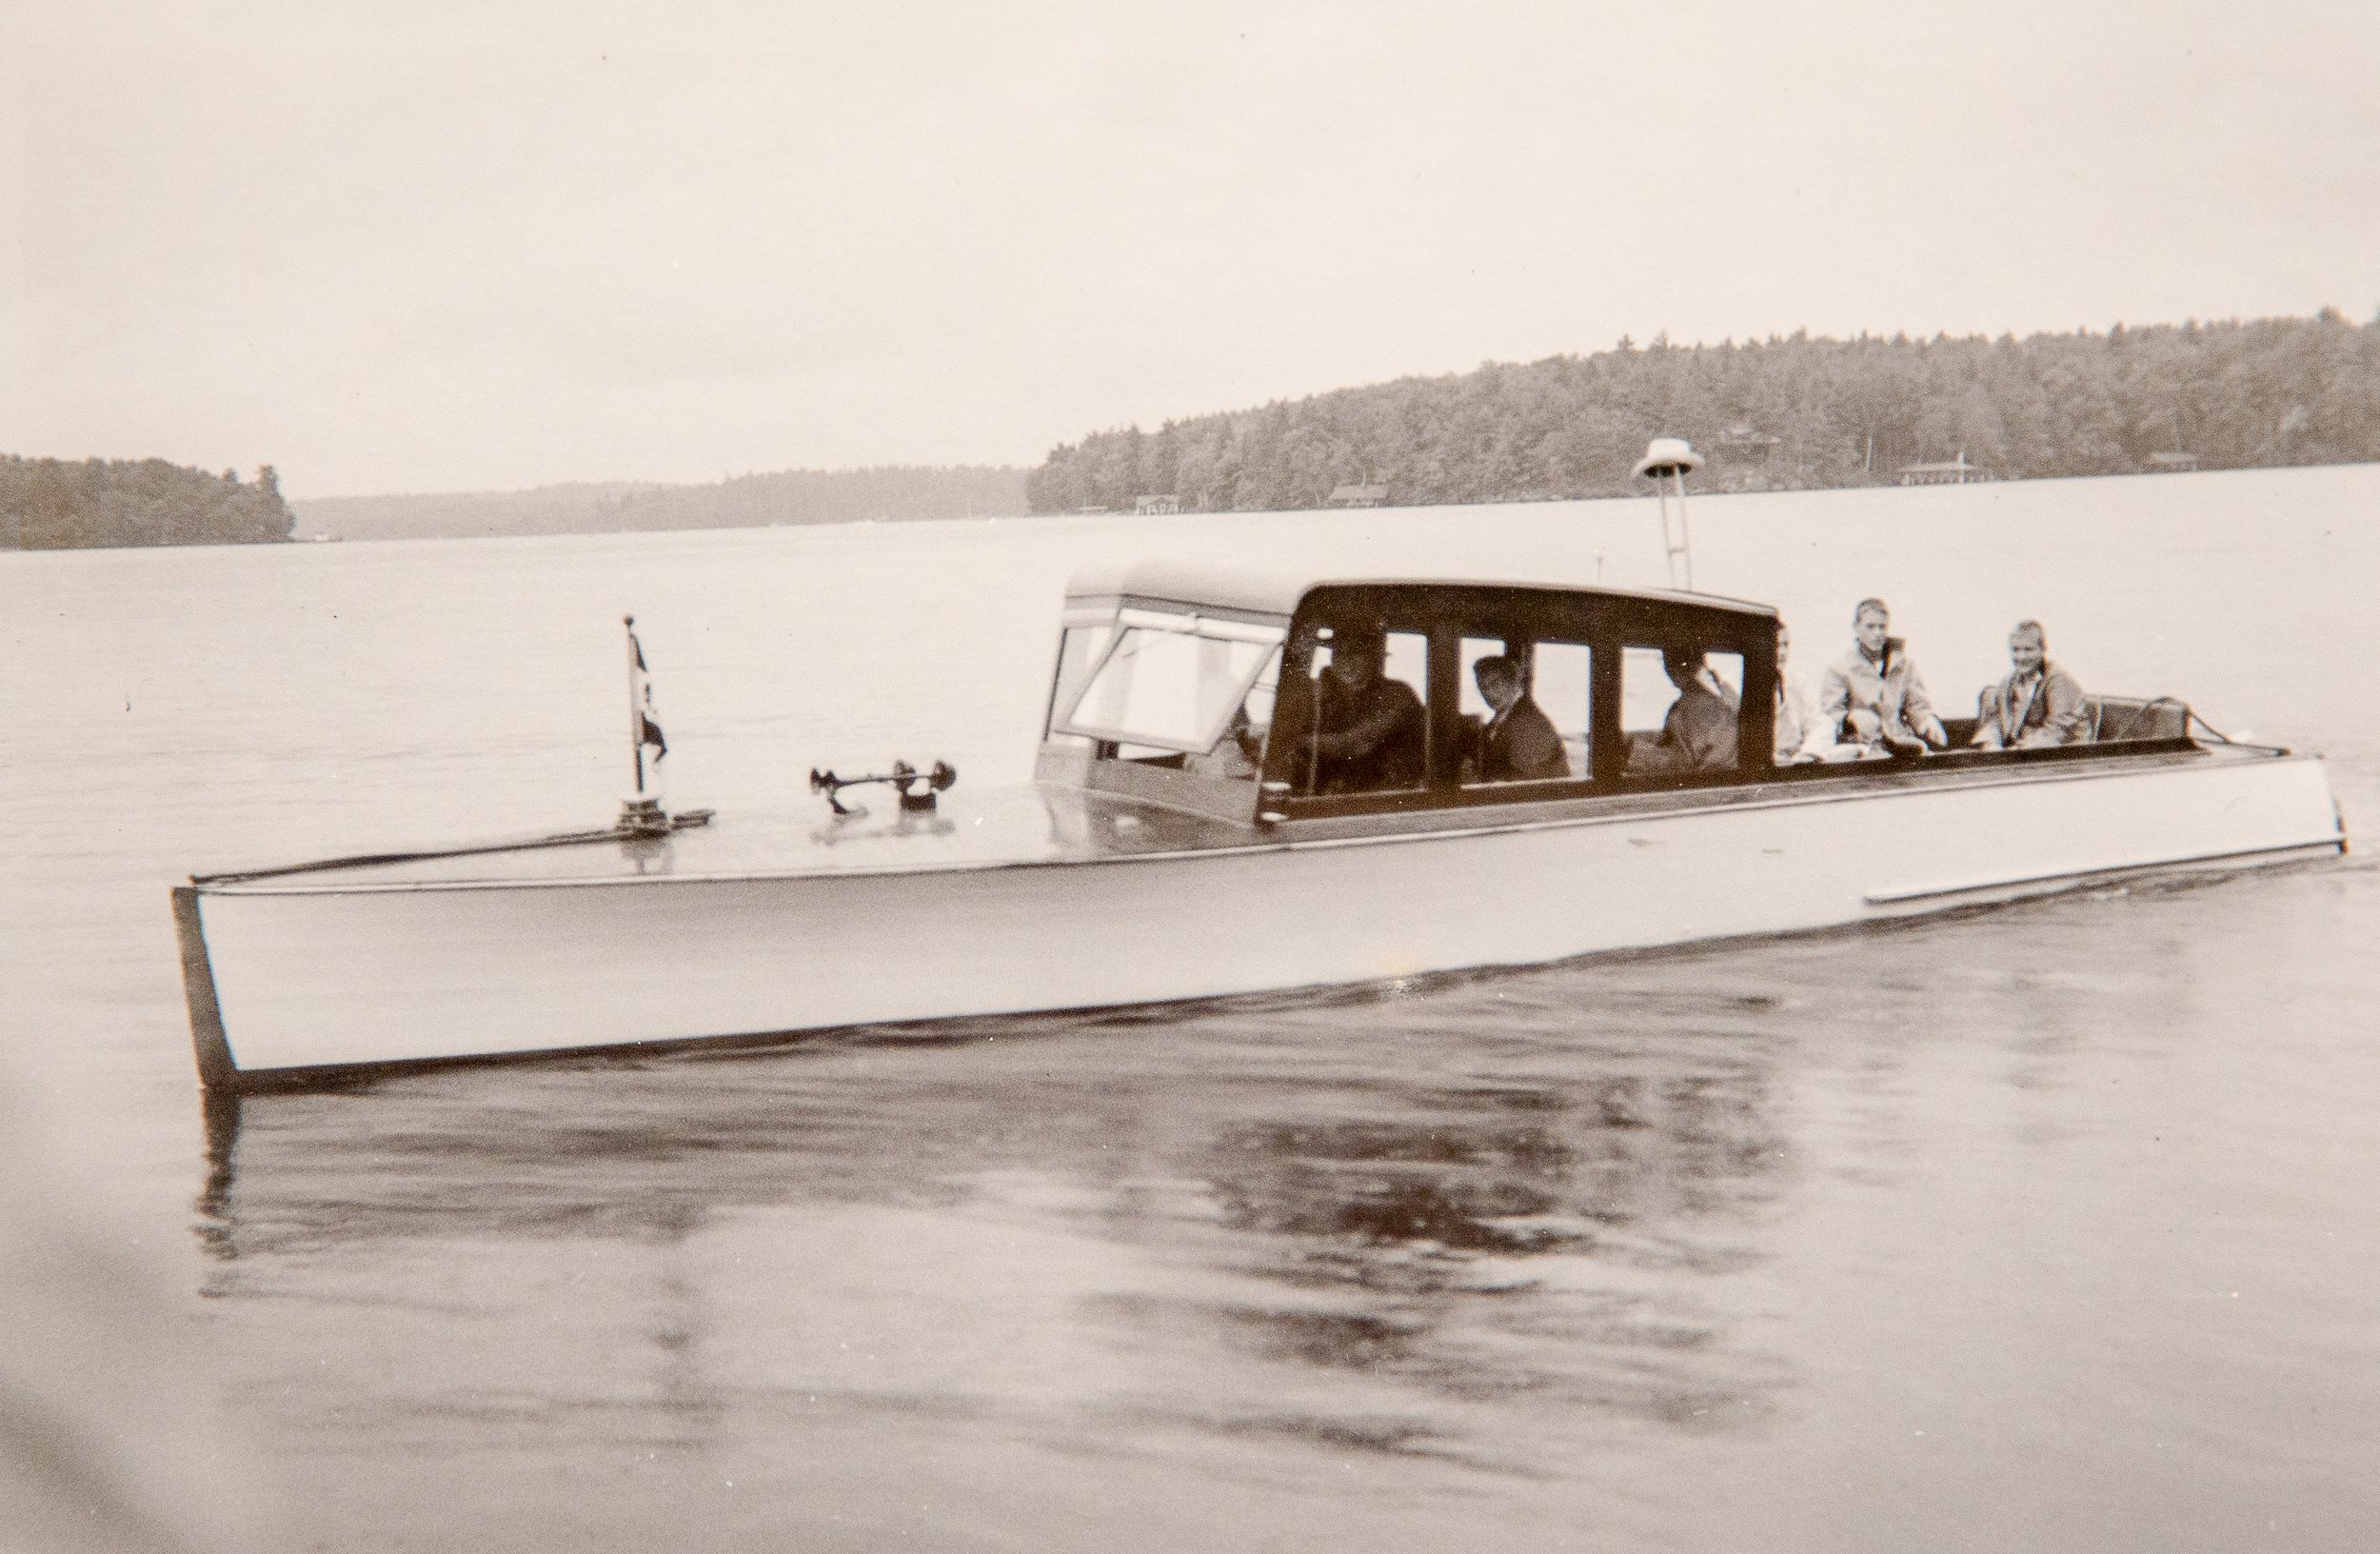    The Garwood, in service 1952-1962   